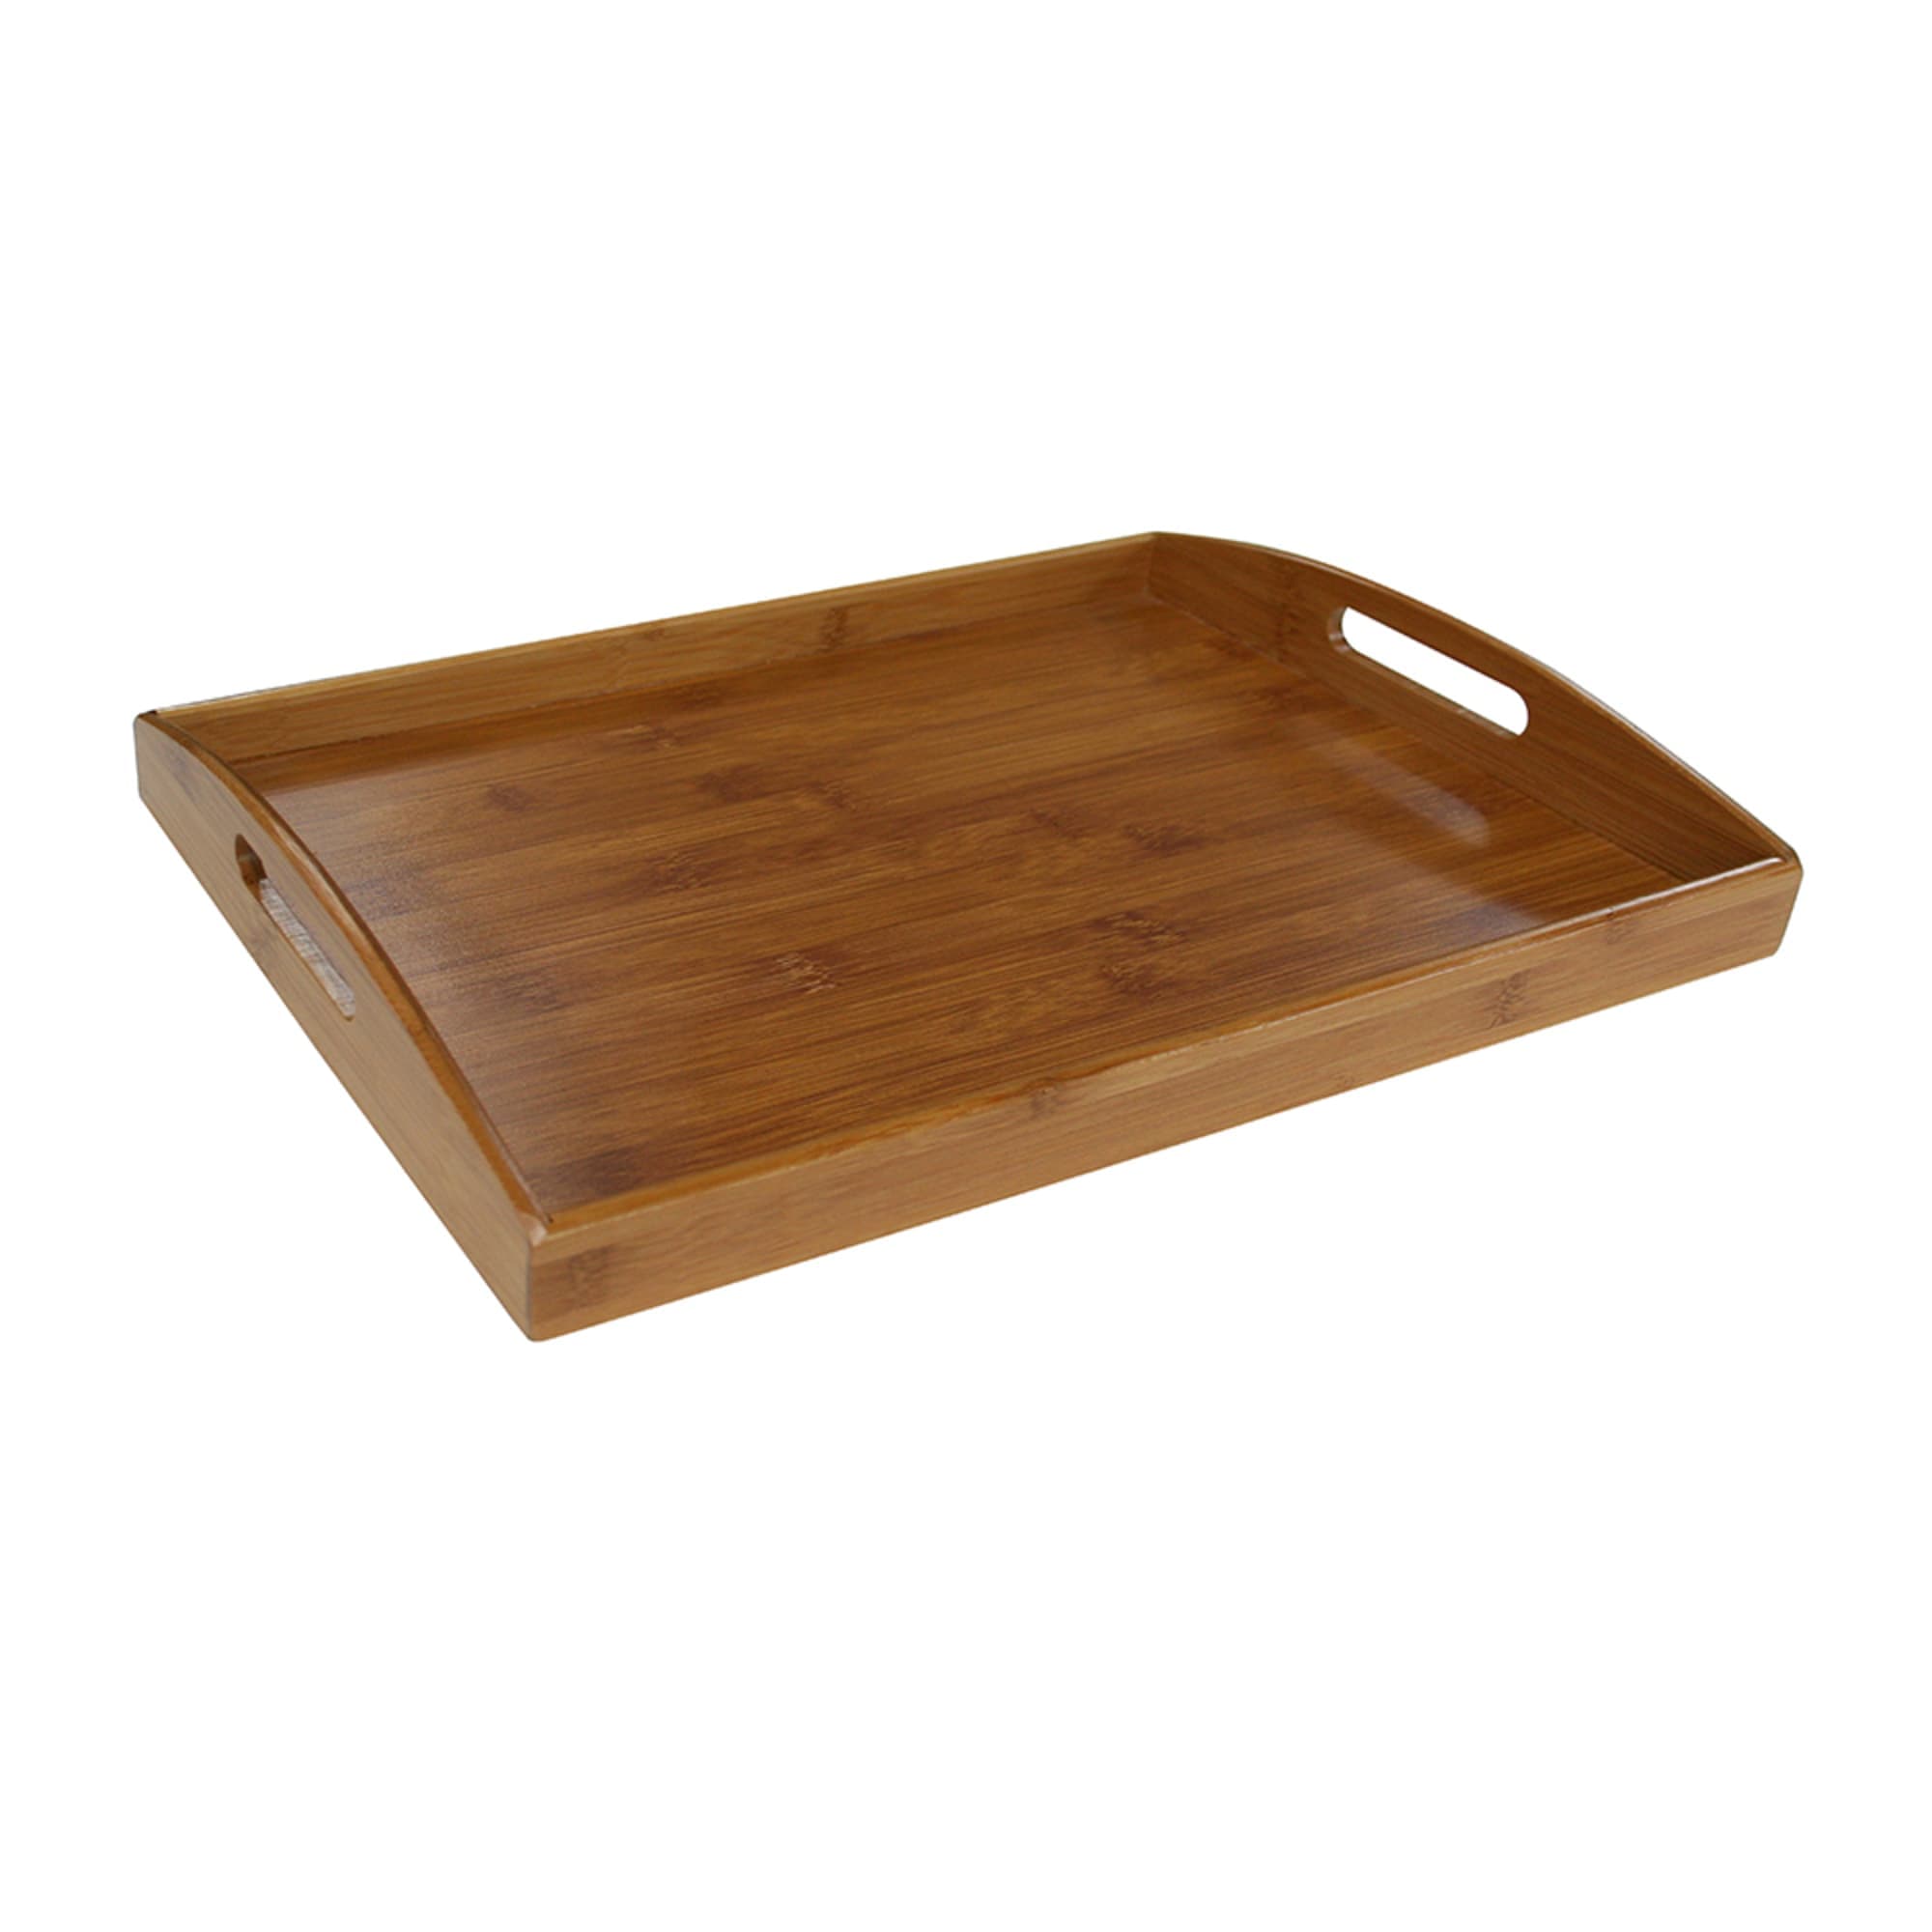 Home Basics Bamboo Serving Tray with Open Handles, Natural $10.00 EACH, CASE PACK OF 12